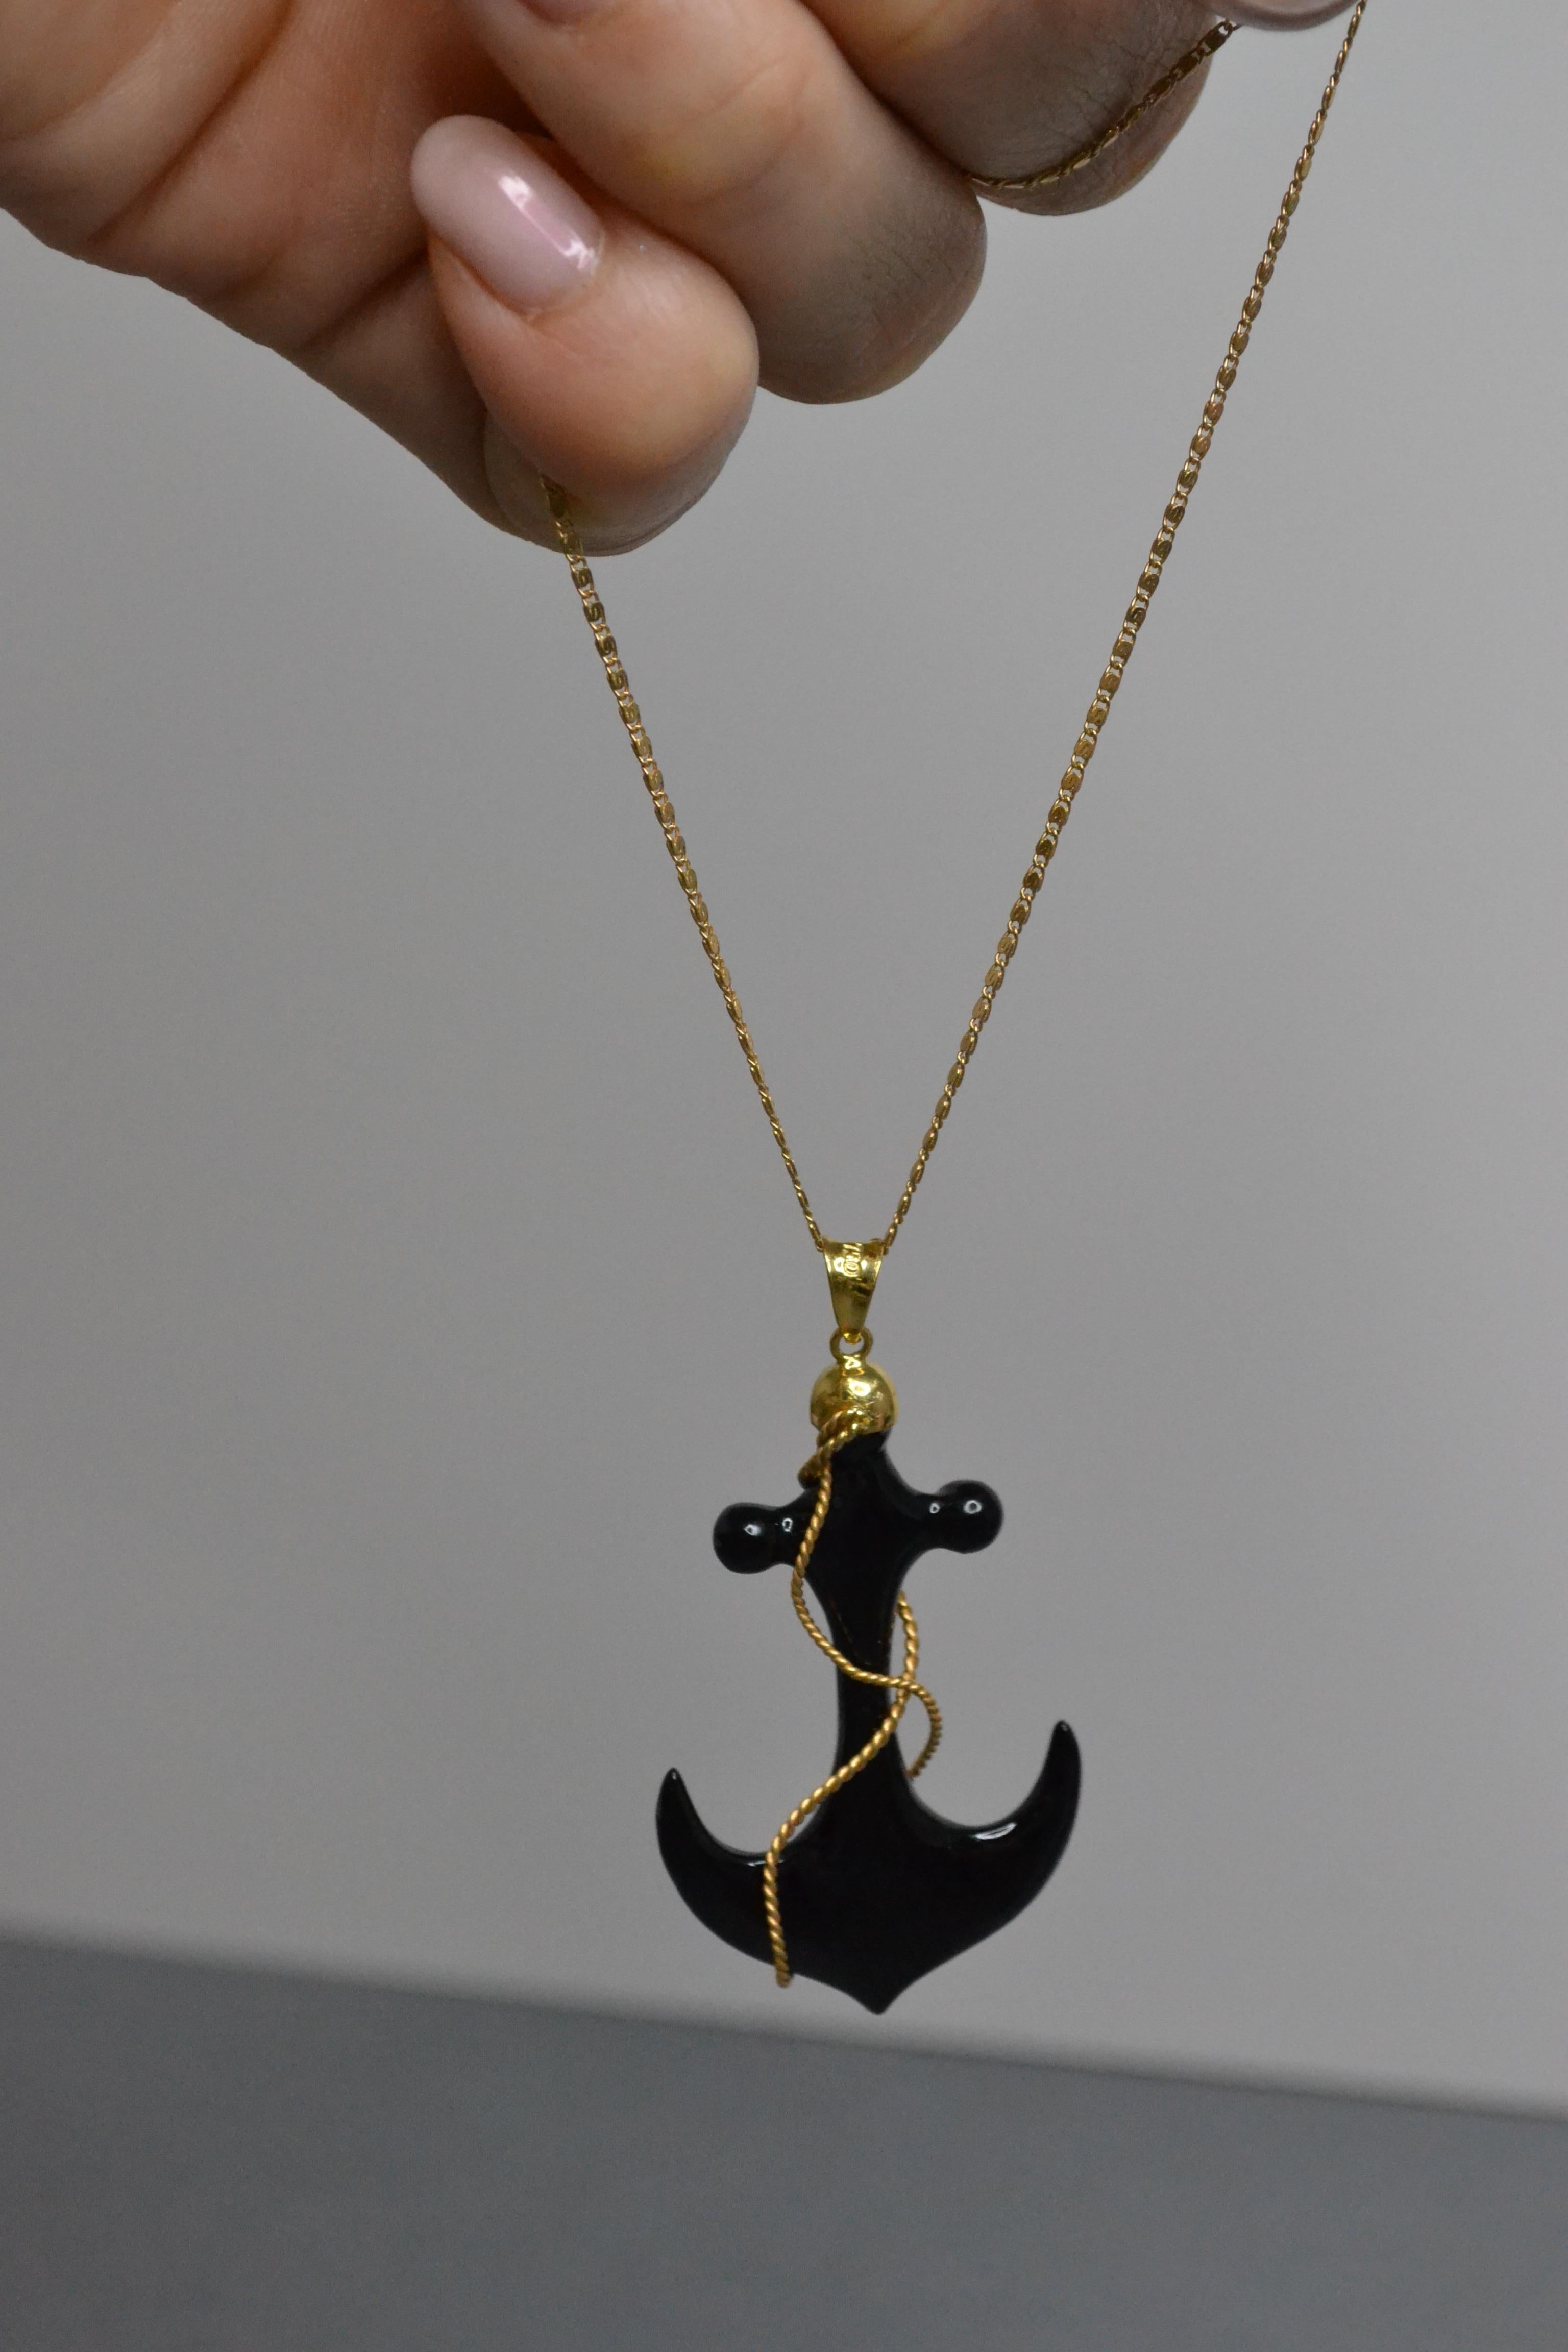 Retro Vintage 18k Gold Onyx Anchor Pendant Limited Edition For Sale